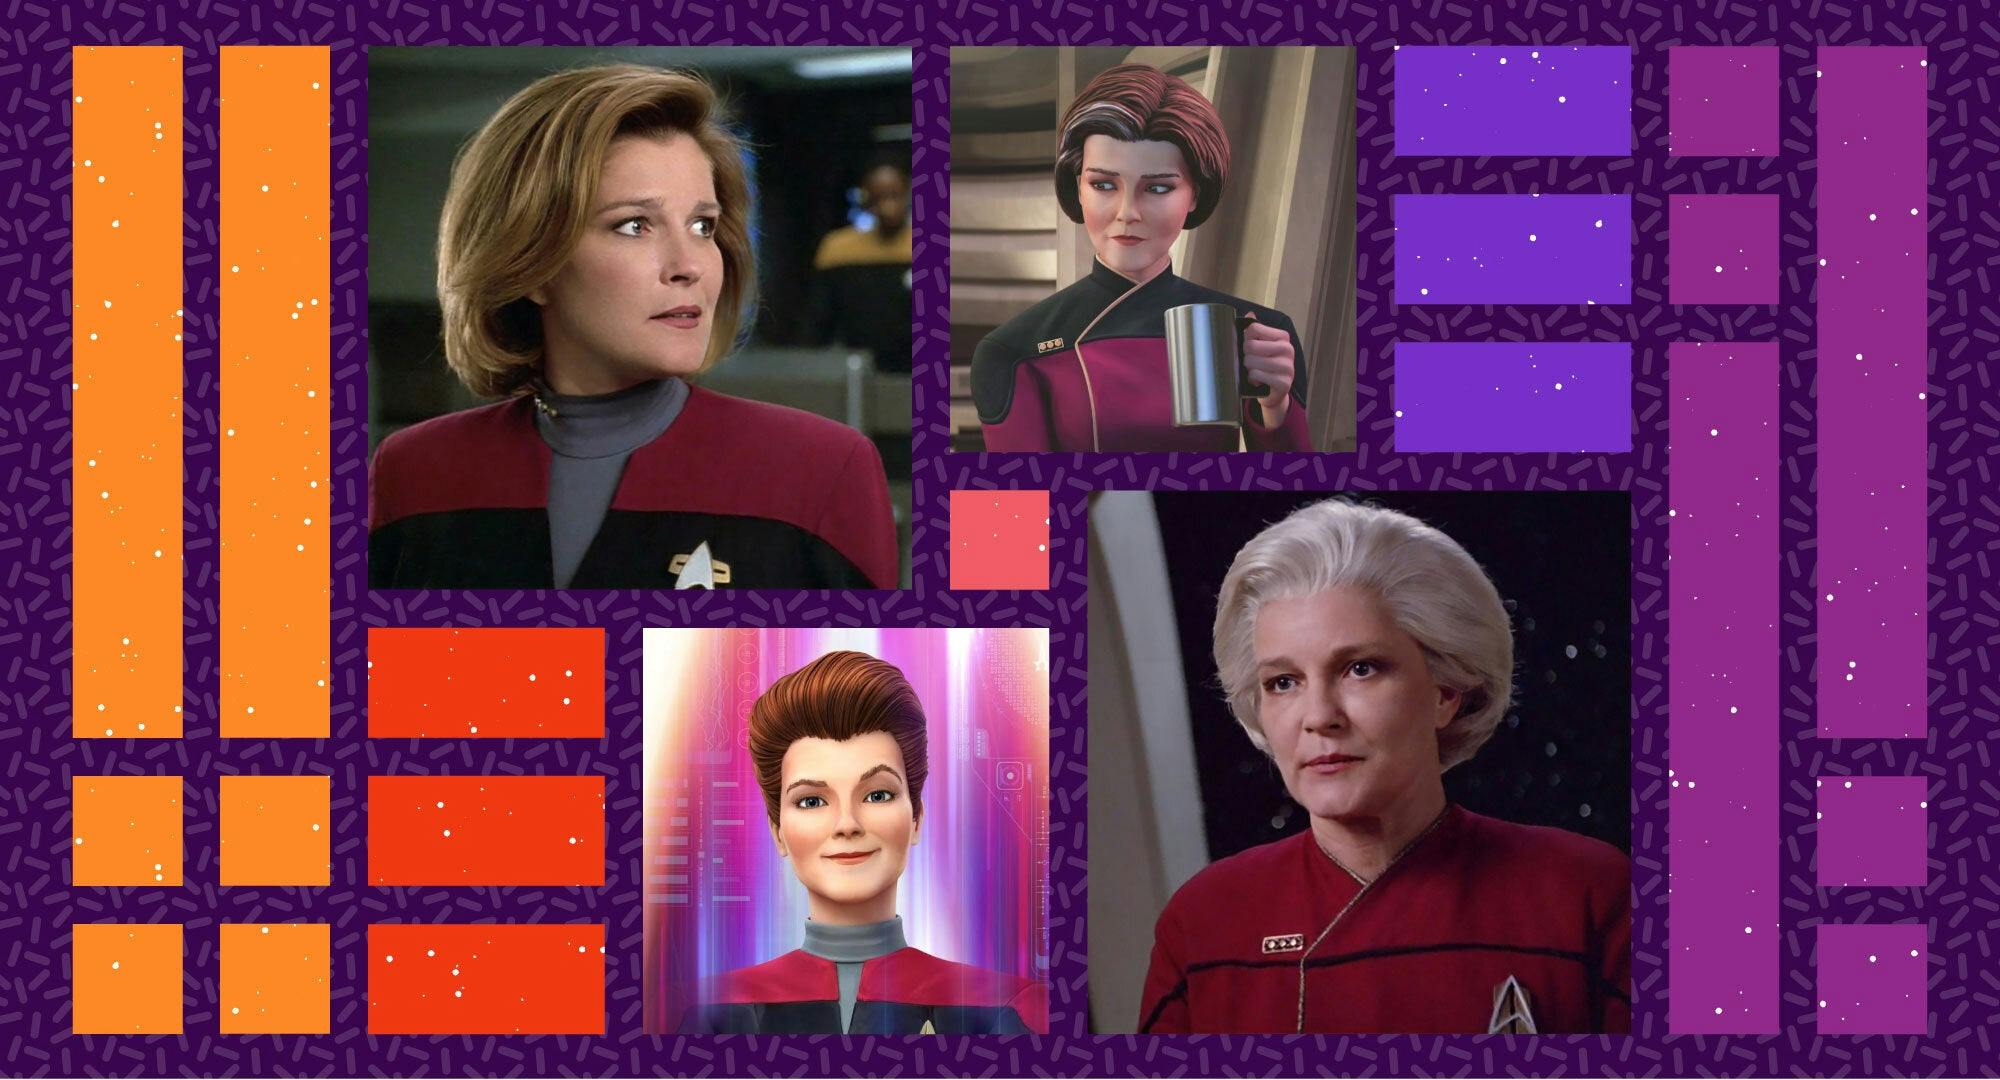 Illustrated banner featuring a montage of Captain Janeway from Star Trek: Voyager and Star Trek: Prodigy